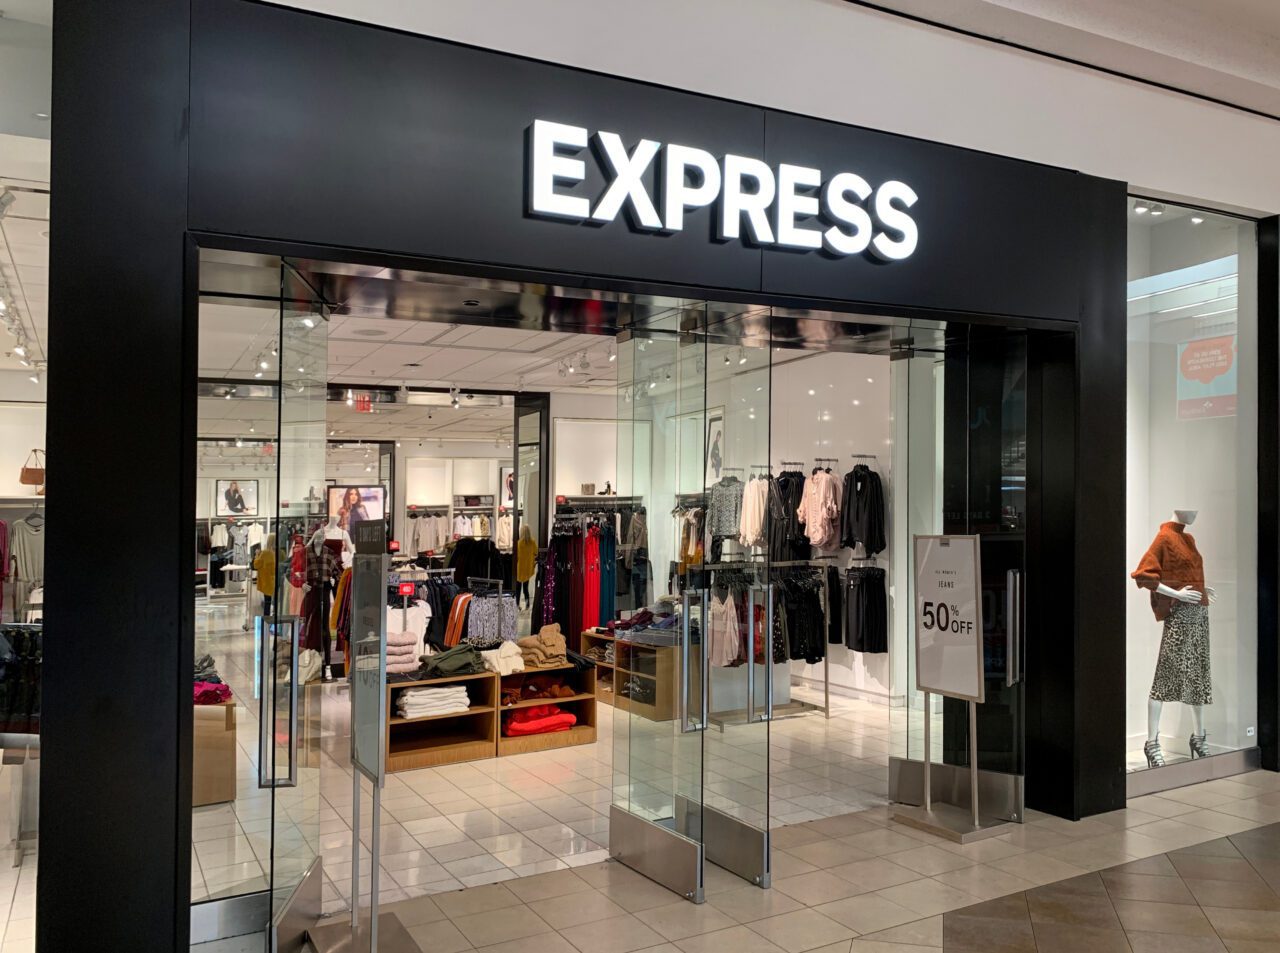 WHP Global has invested in Express to license the brand and pursue joint acquisitions.